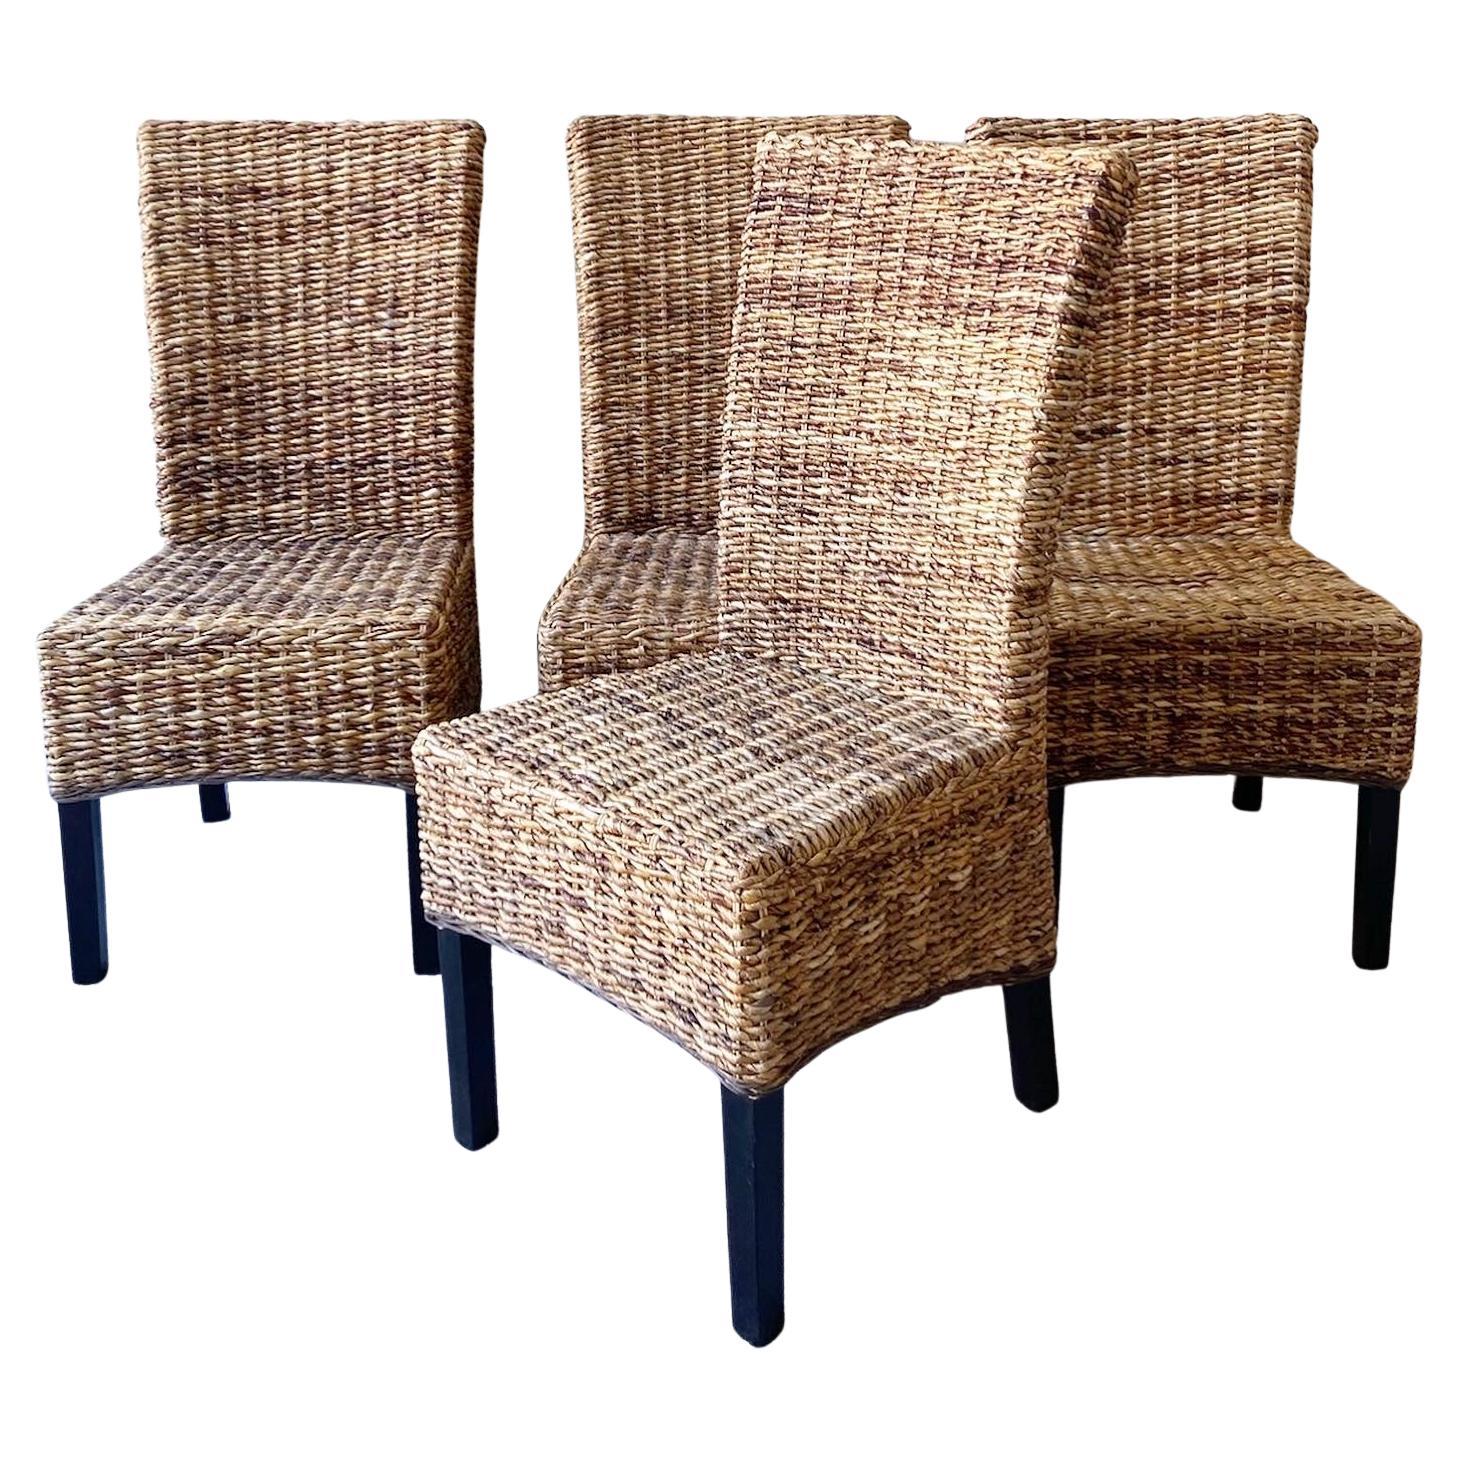 Boho Chic Woven Sea Grass Dining Chairs